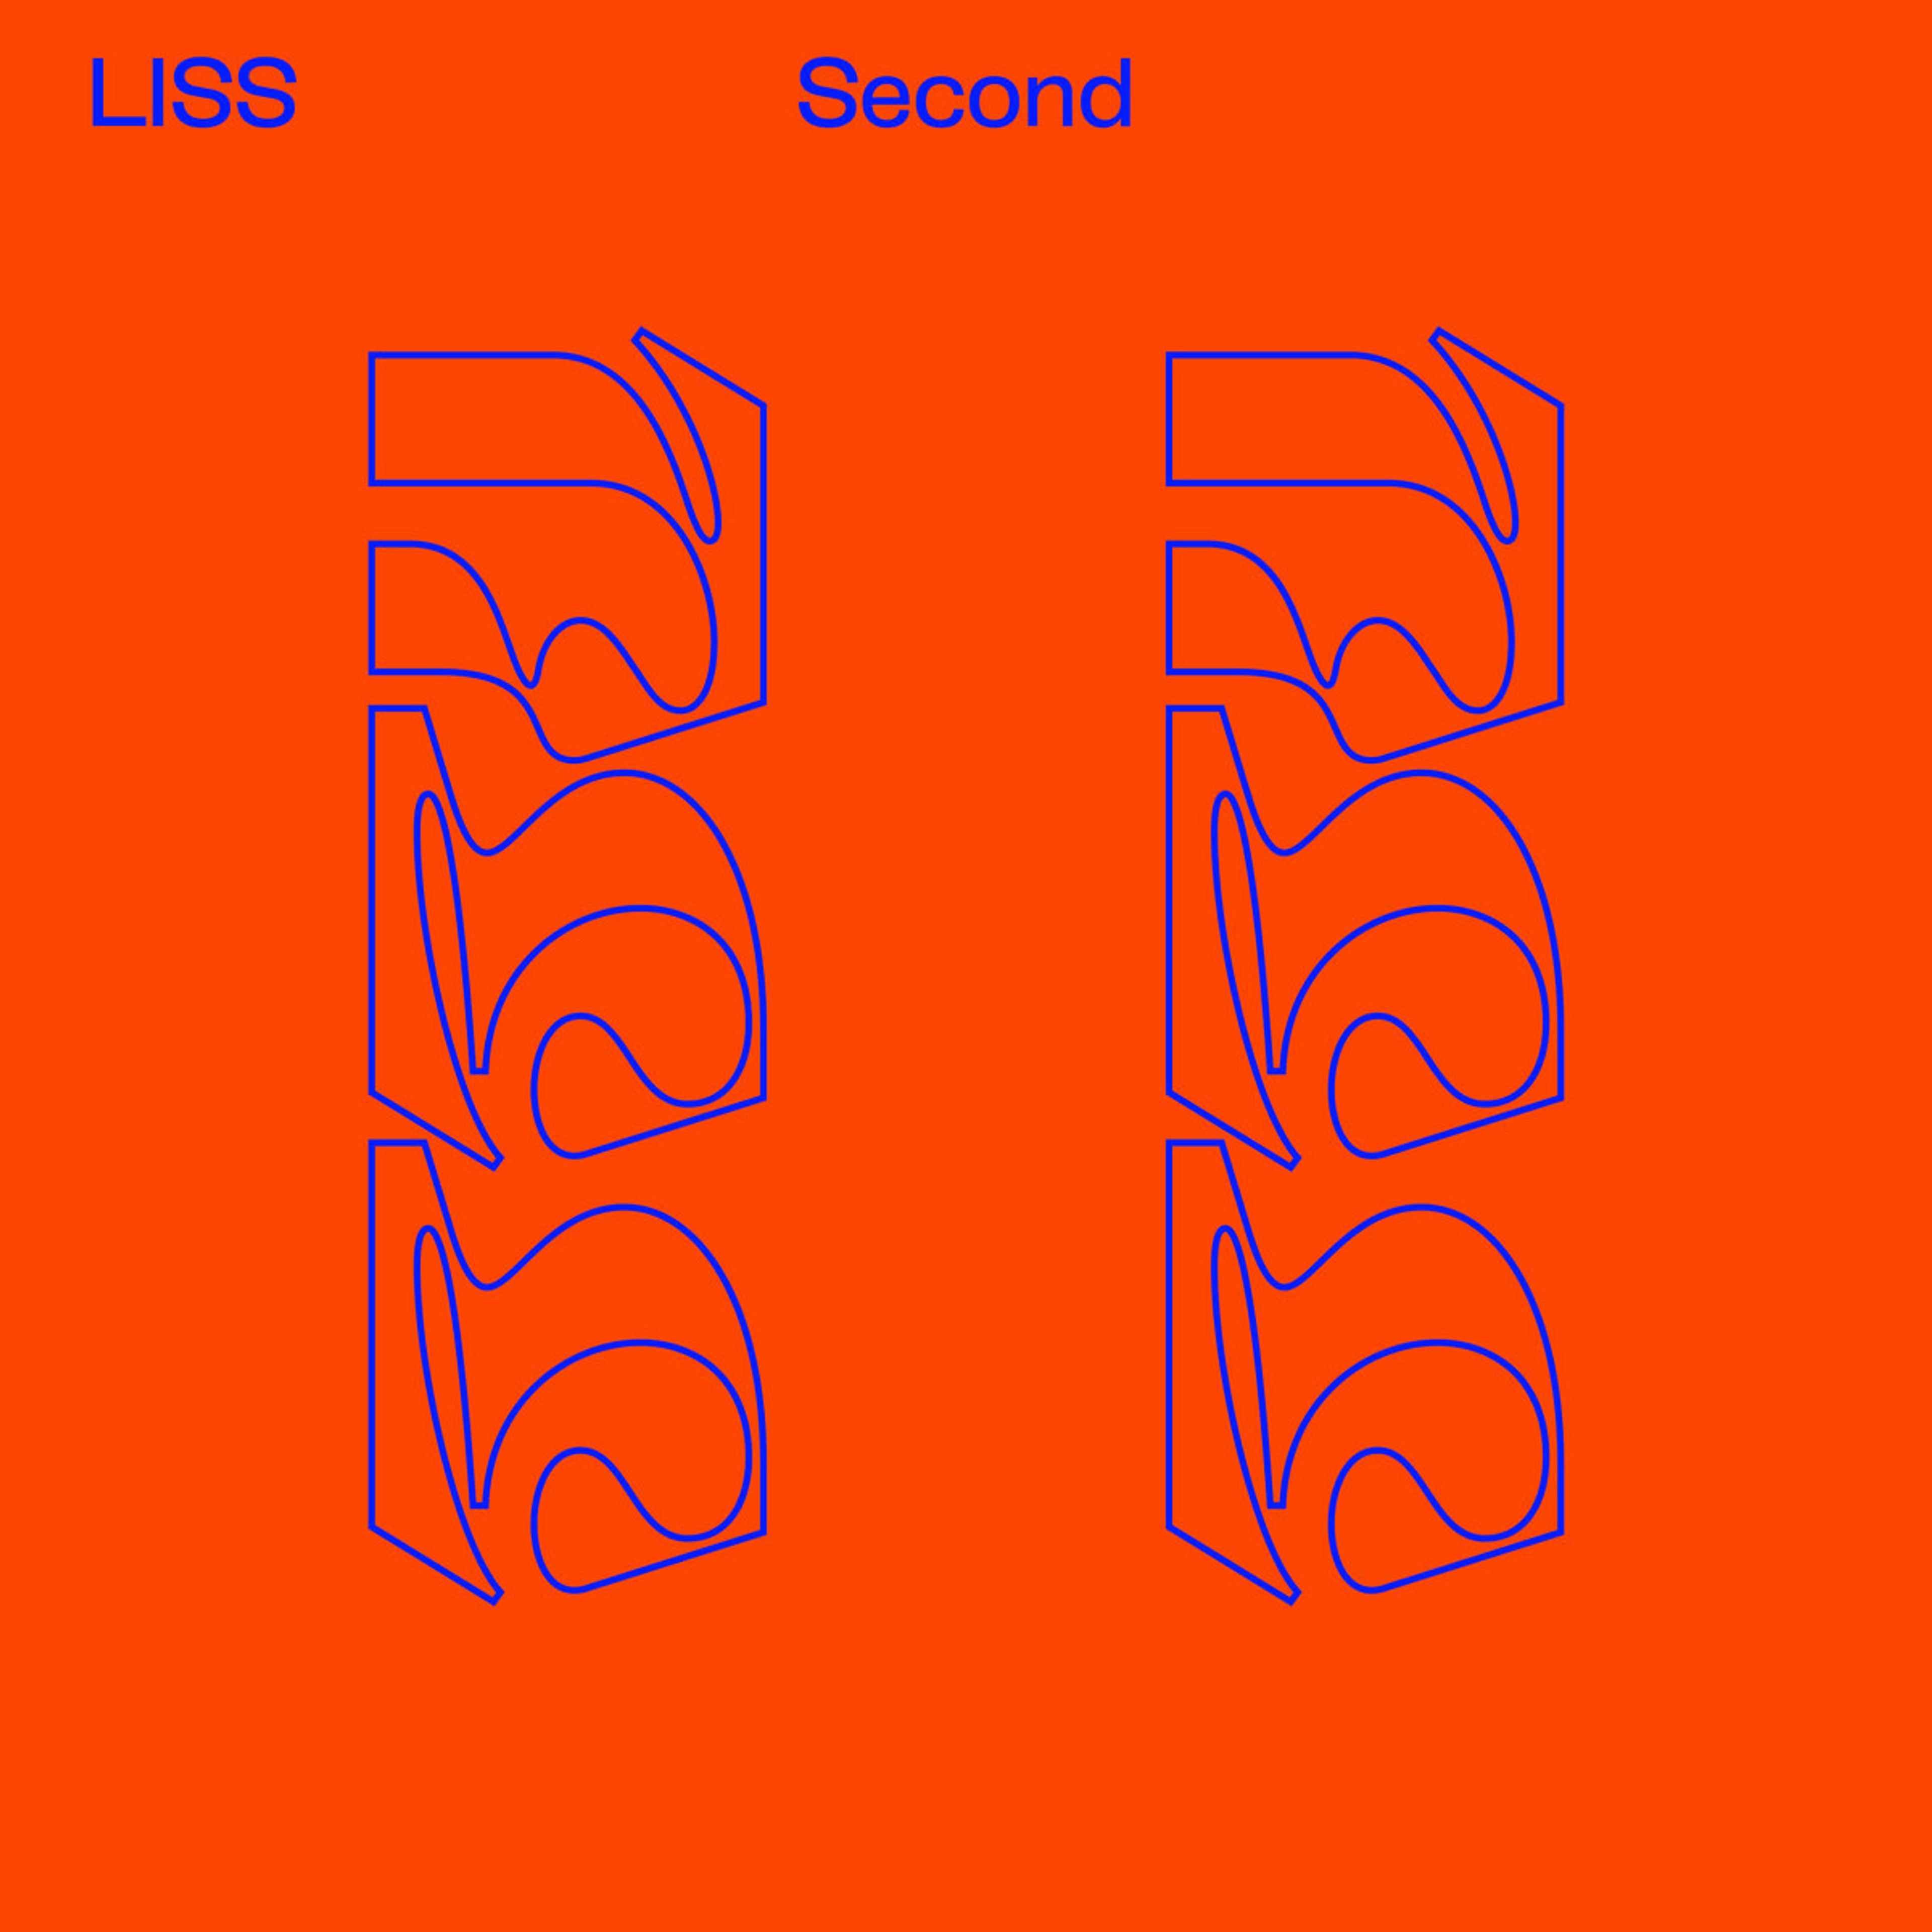 Artwork for Second by Liss